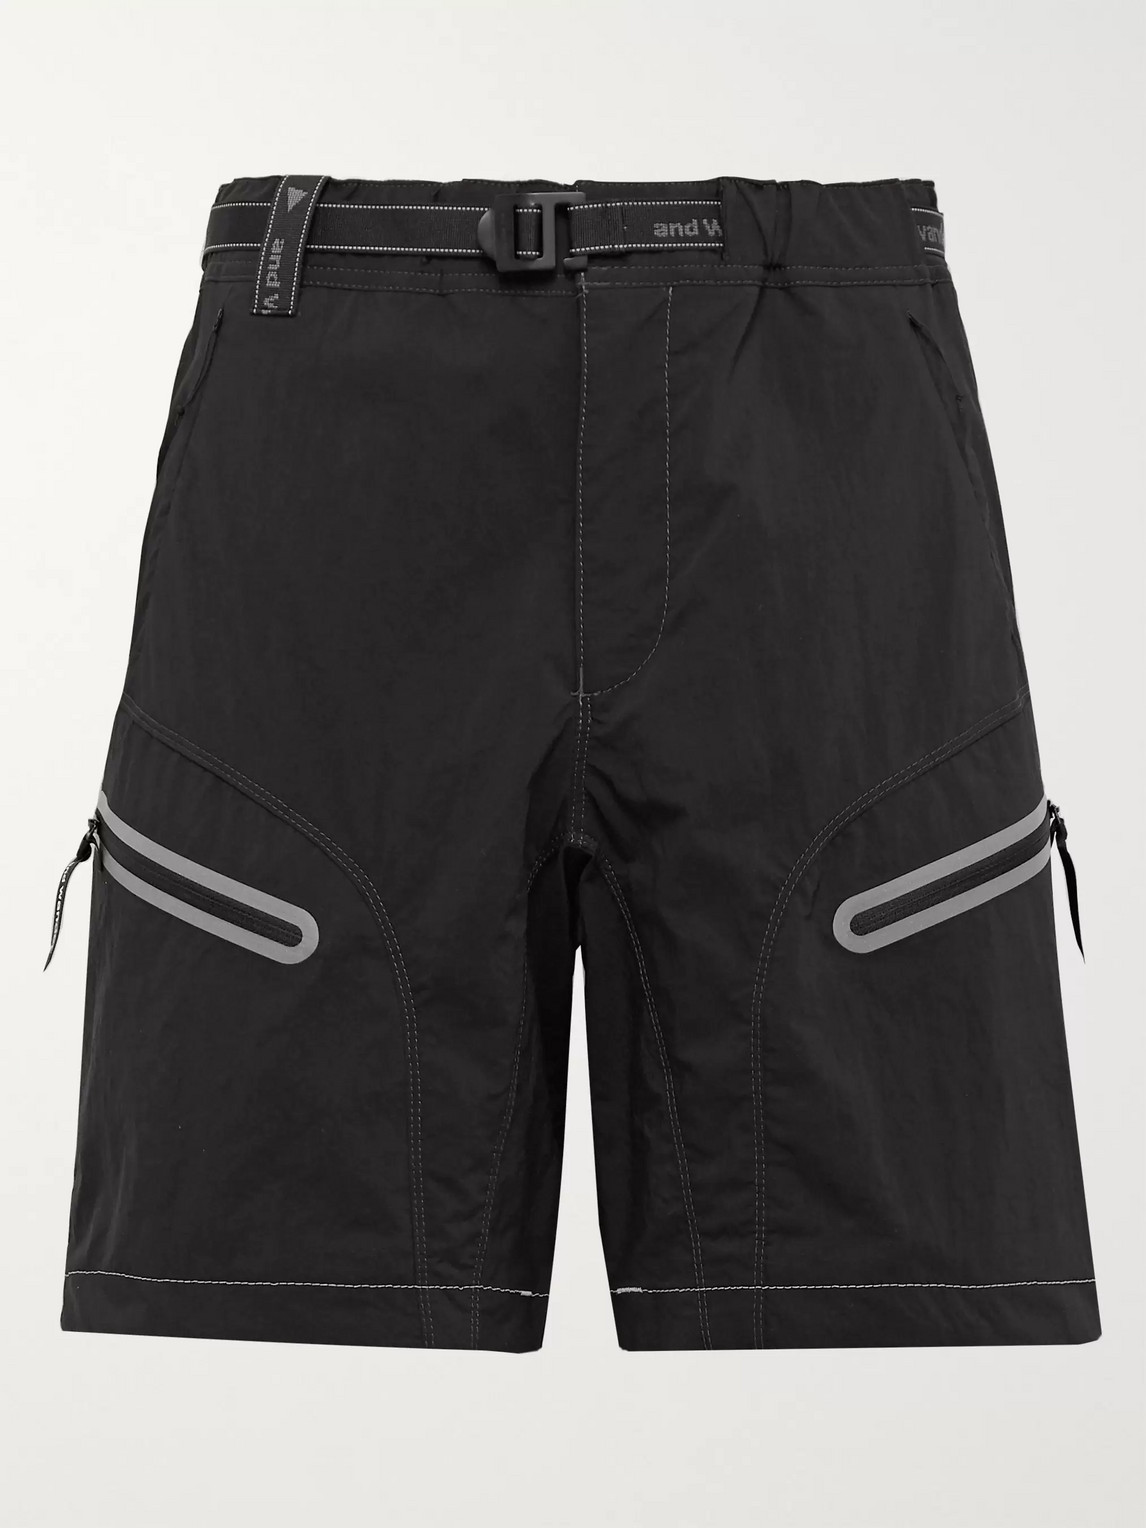 AND WANDER BELTED NYLON-BLEND SHORTS